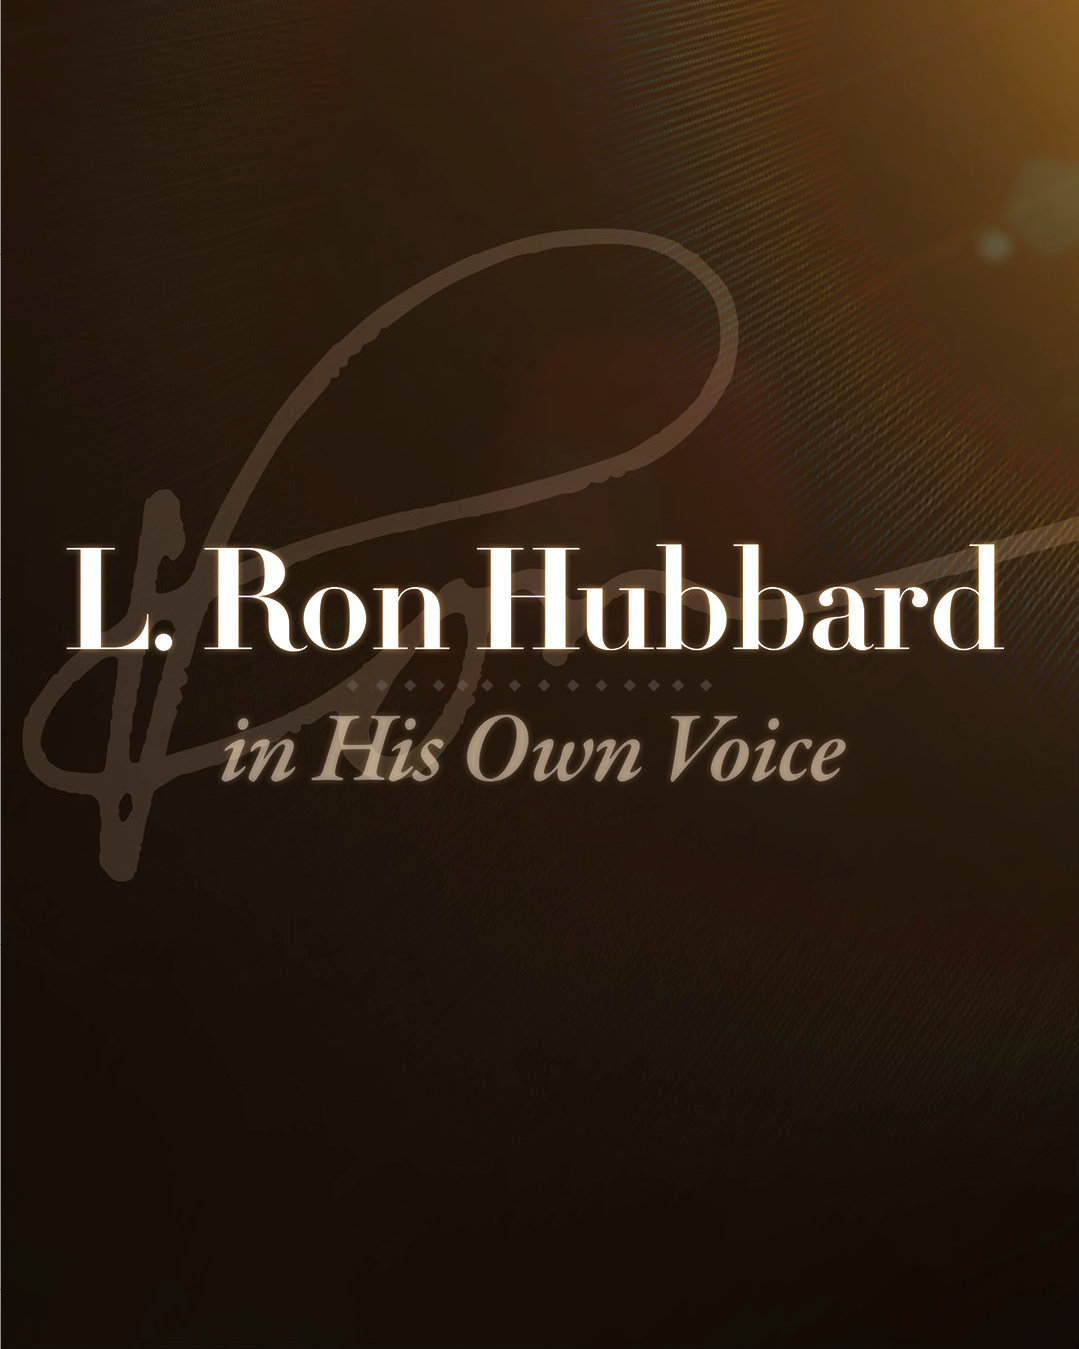 L. Ronald Hubbard in His Own Voice